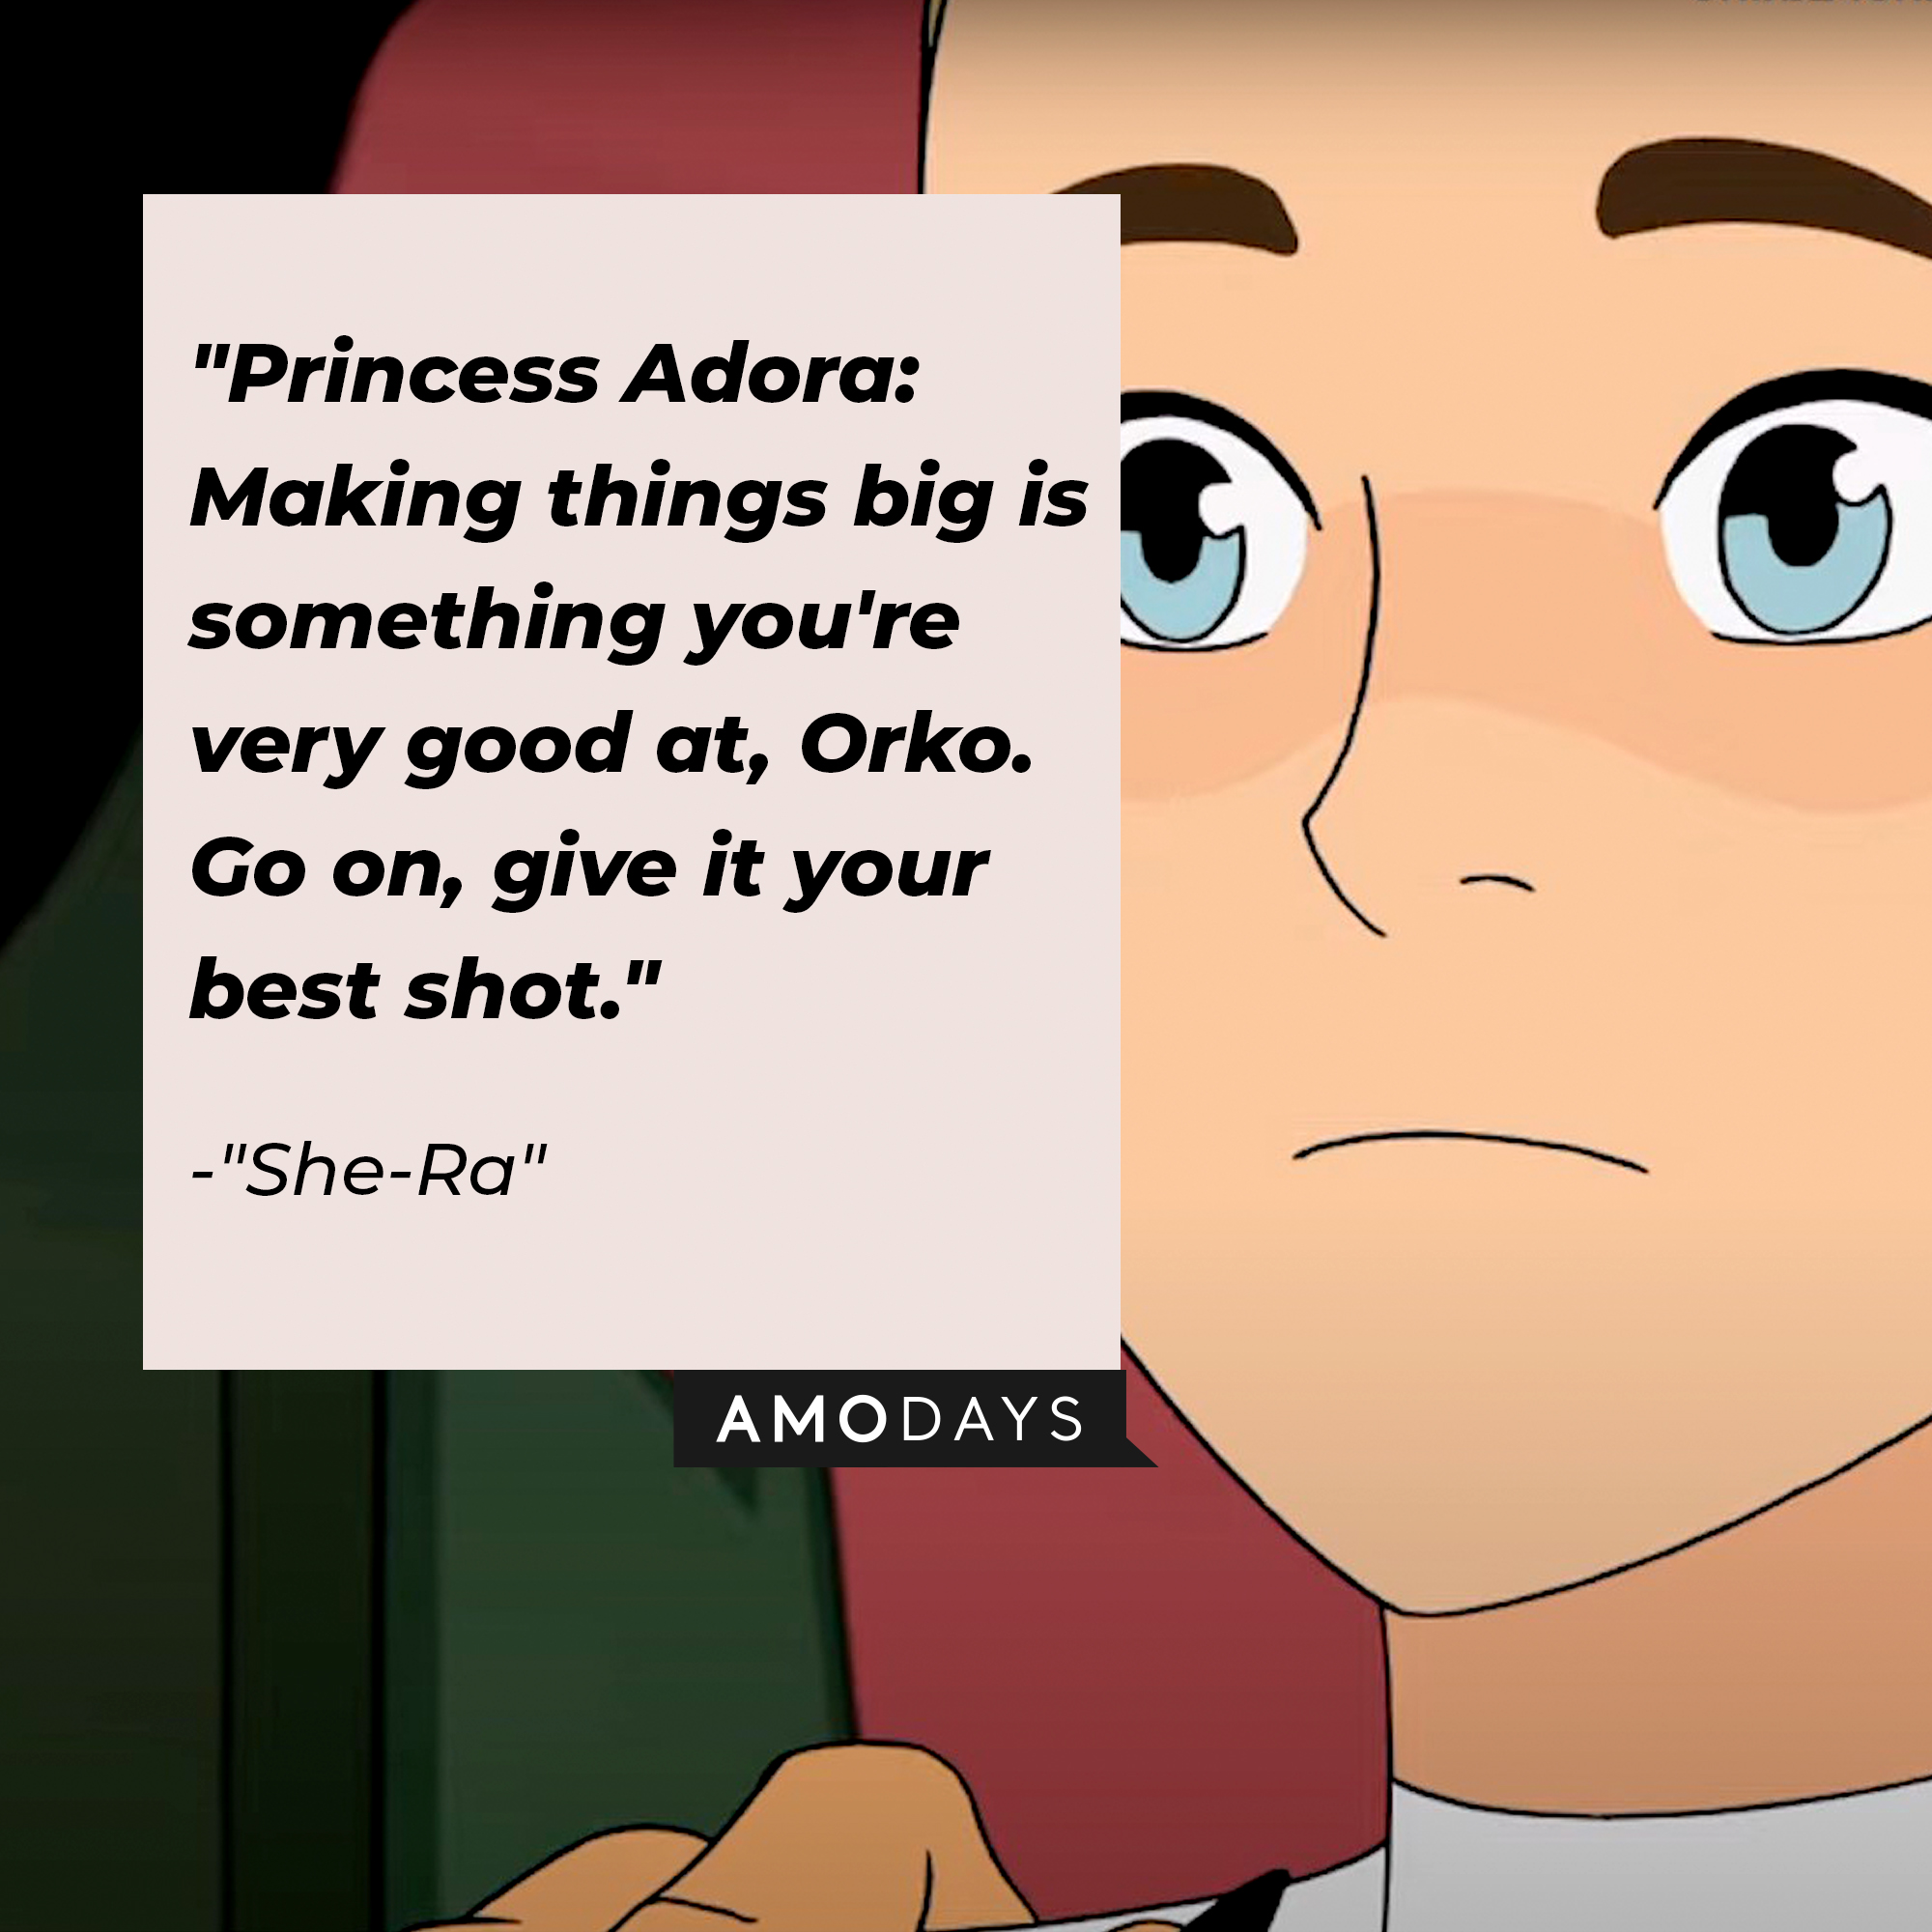 "She-Ra's" quote: "Princess Adora: Making things big is something you're very good at, Orko. Go on, give it your best shot." | Source: Facebook.com/DreamWorksSheRa